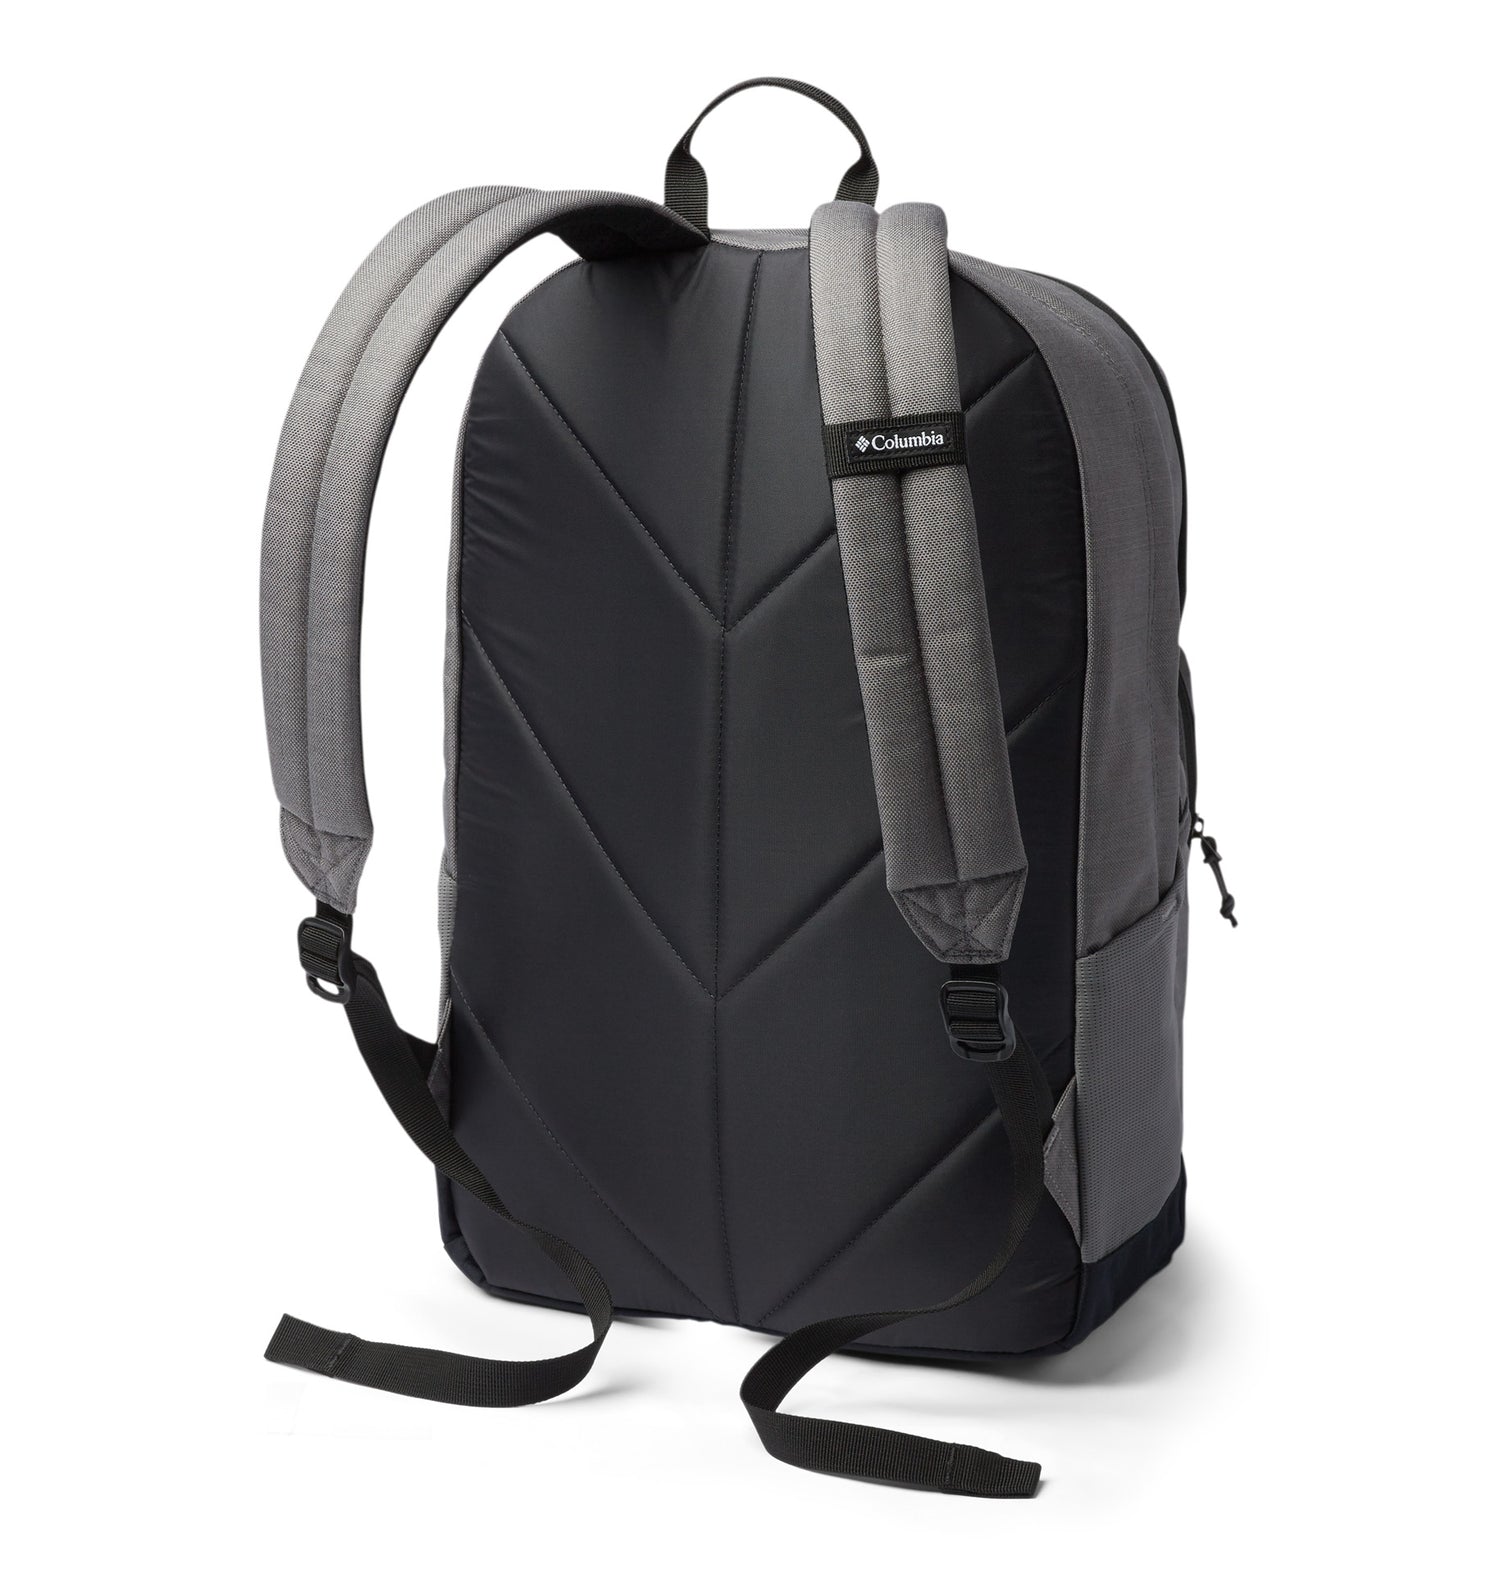 Angle view of a grey backpack called Zig Zag designed by Columbia showing its a top handle, and shoulder straps and black back panel.